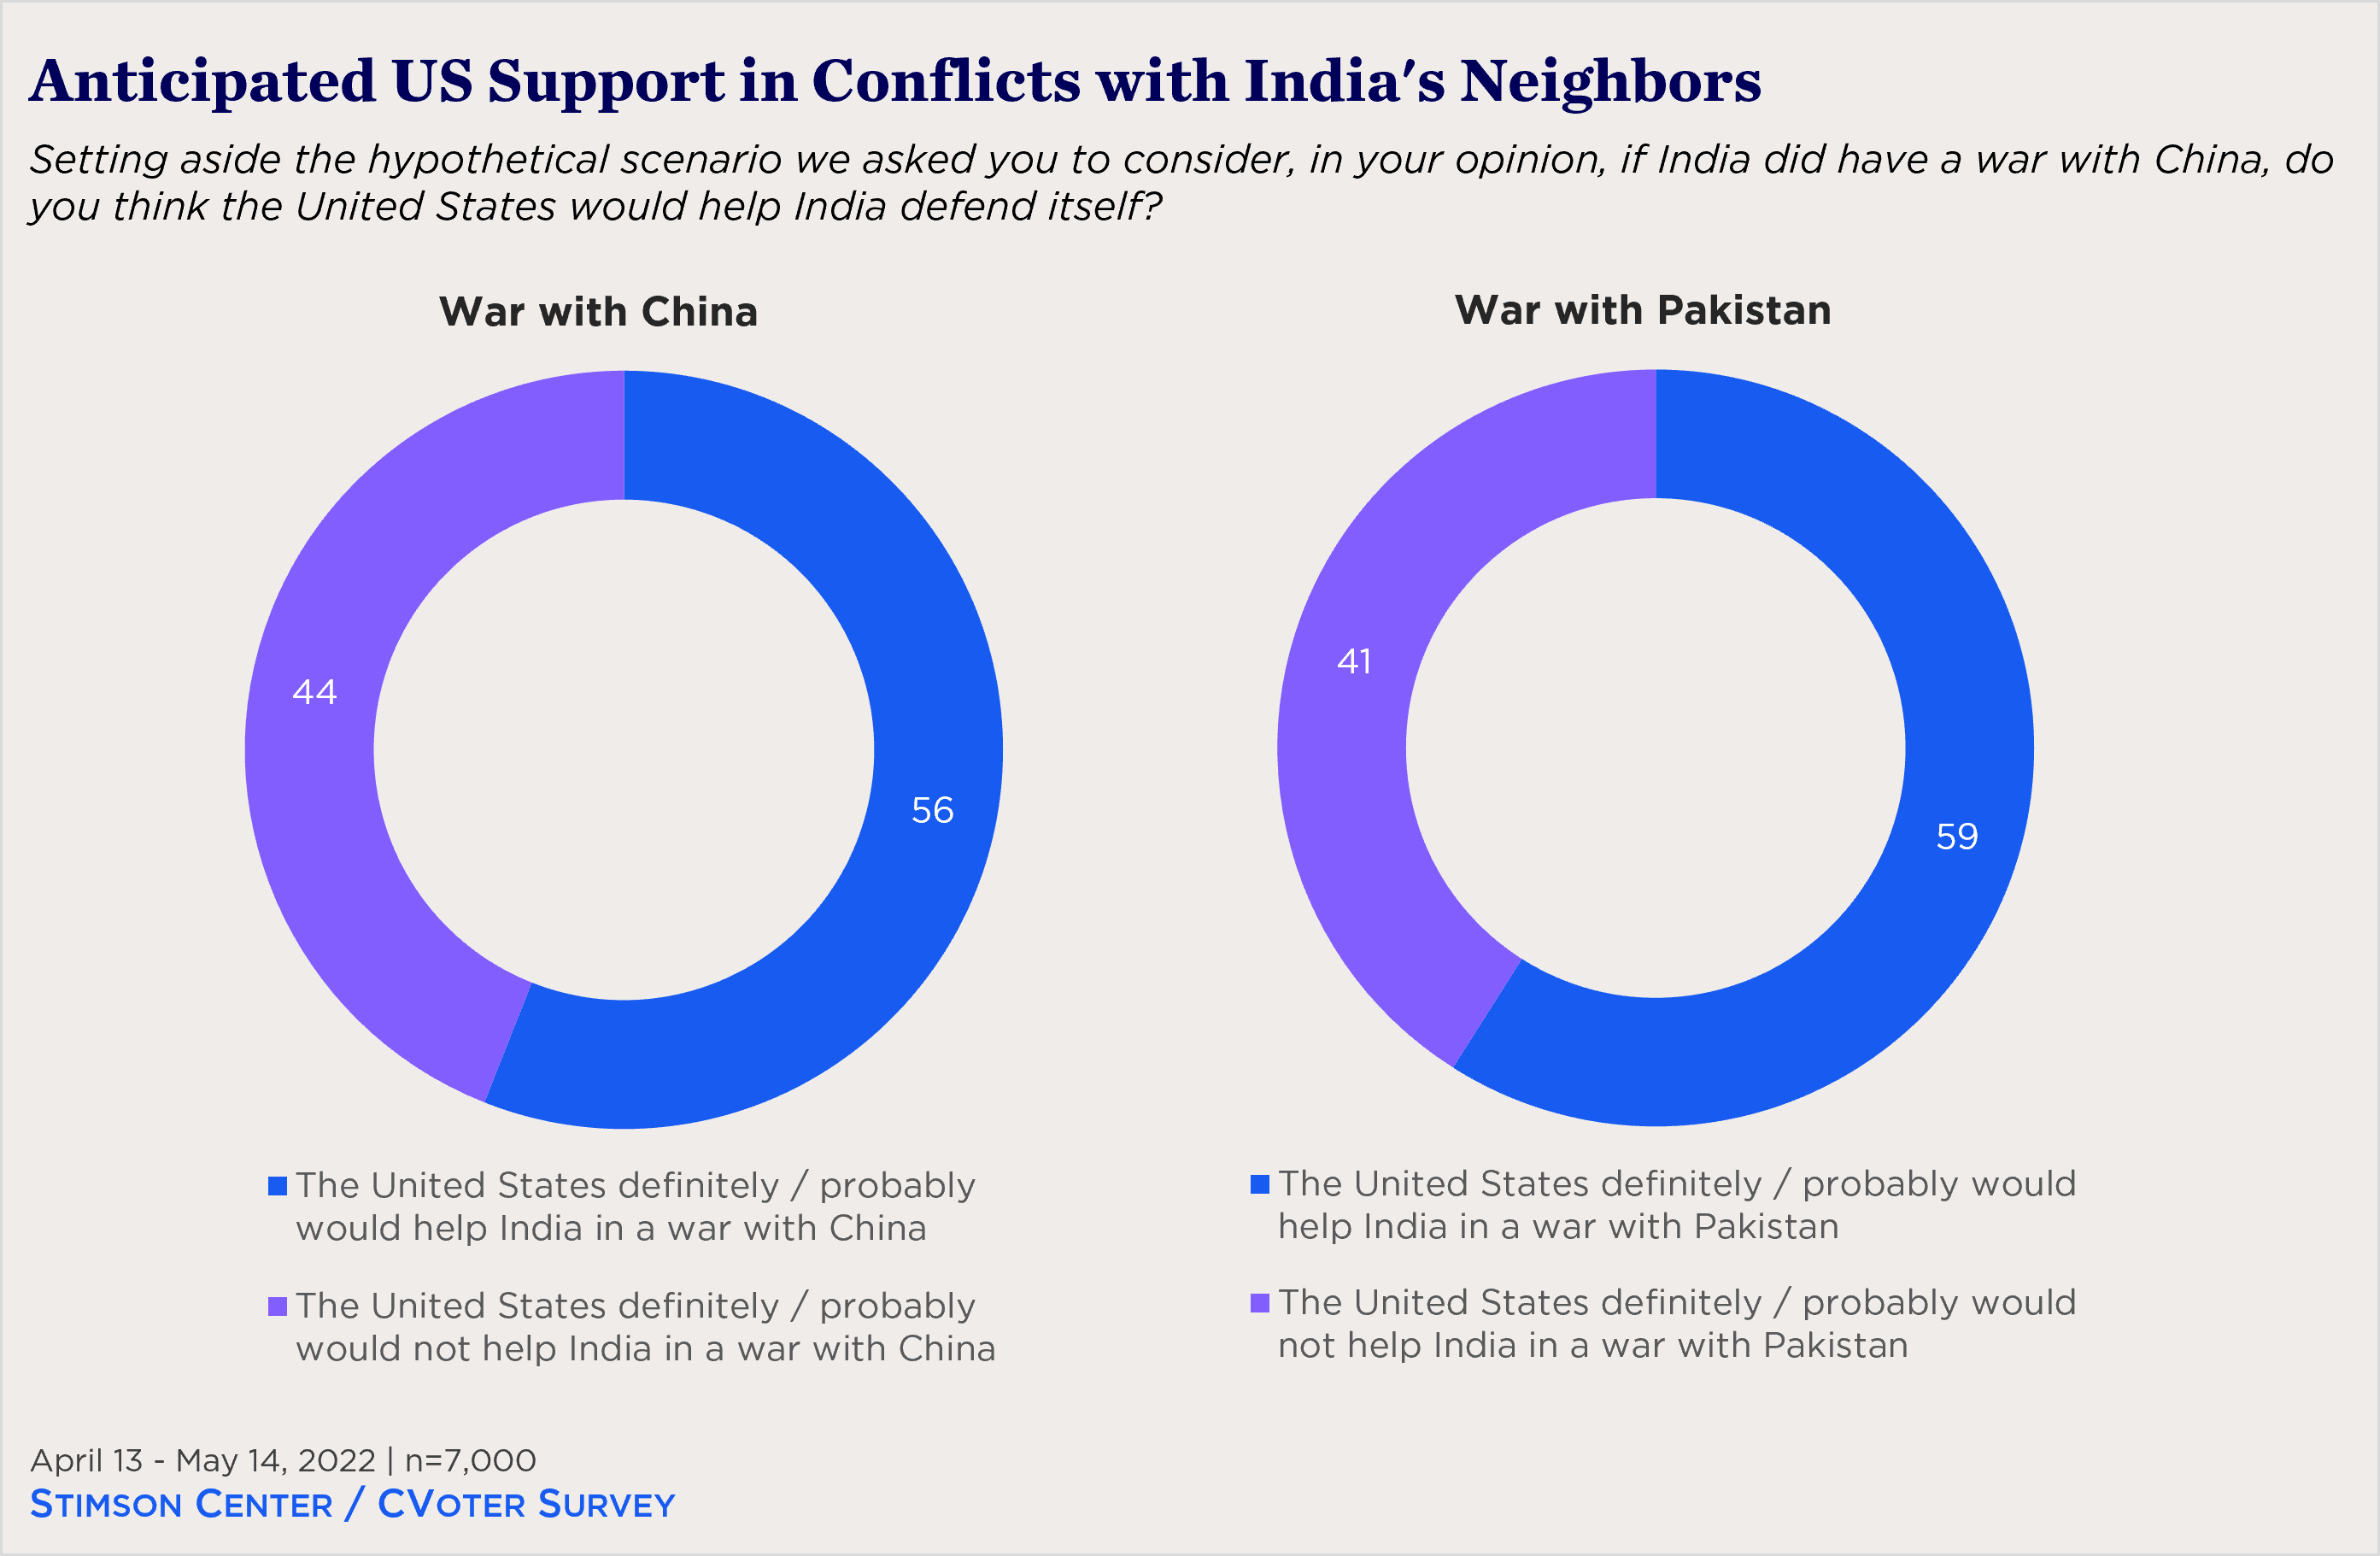 "pie chart showing Anticipated US Support in Conflicts with India's Neighbors"